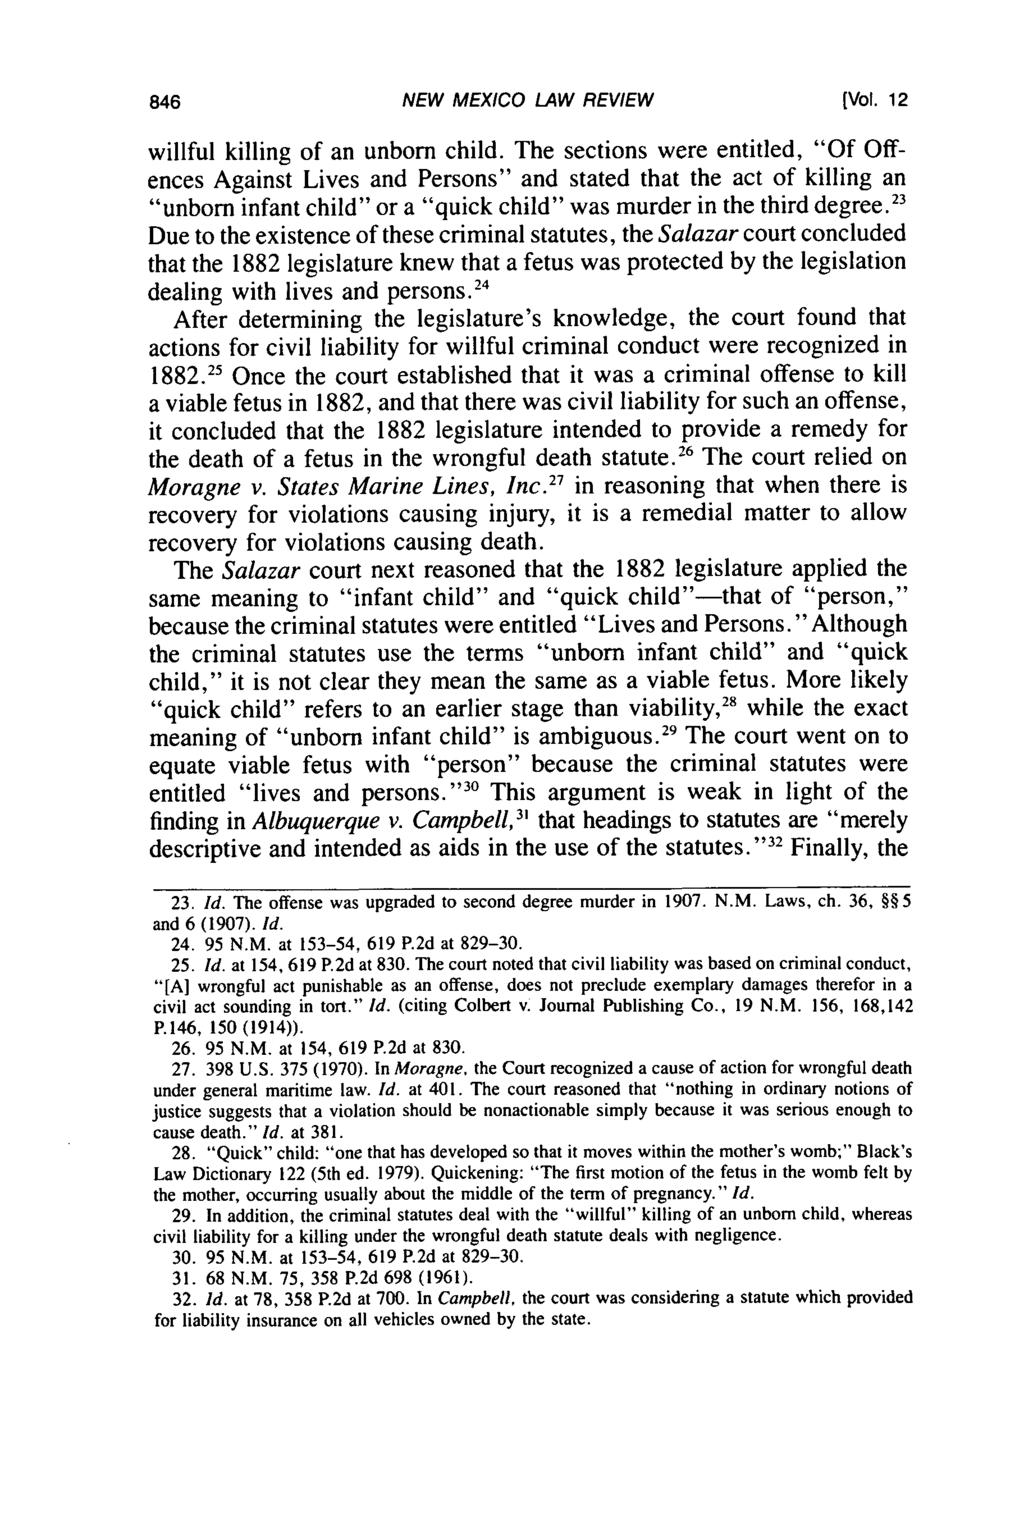 NEW MEXICO LAW REVIEW (Vol. 12 willful killing of an unborn child.